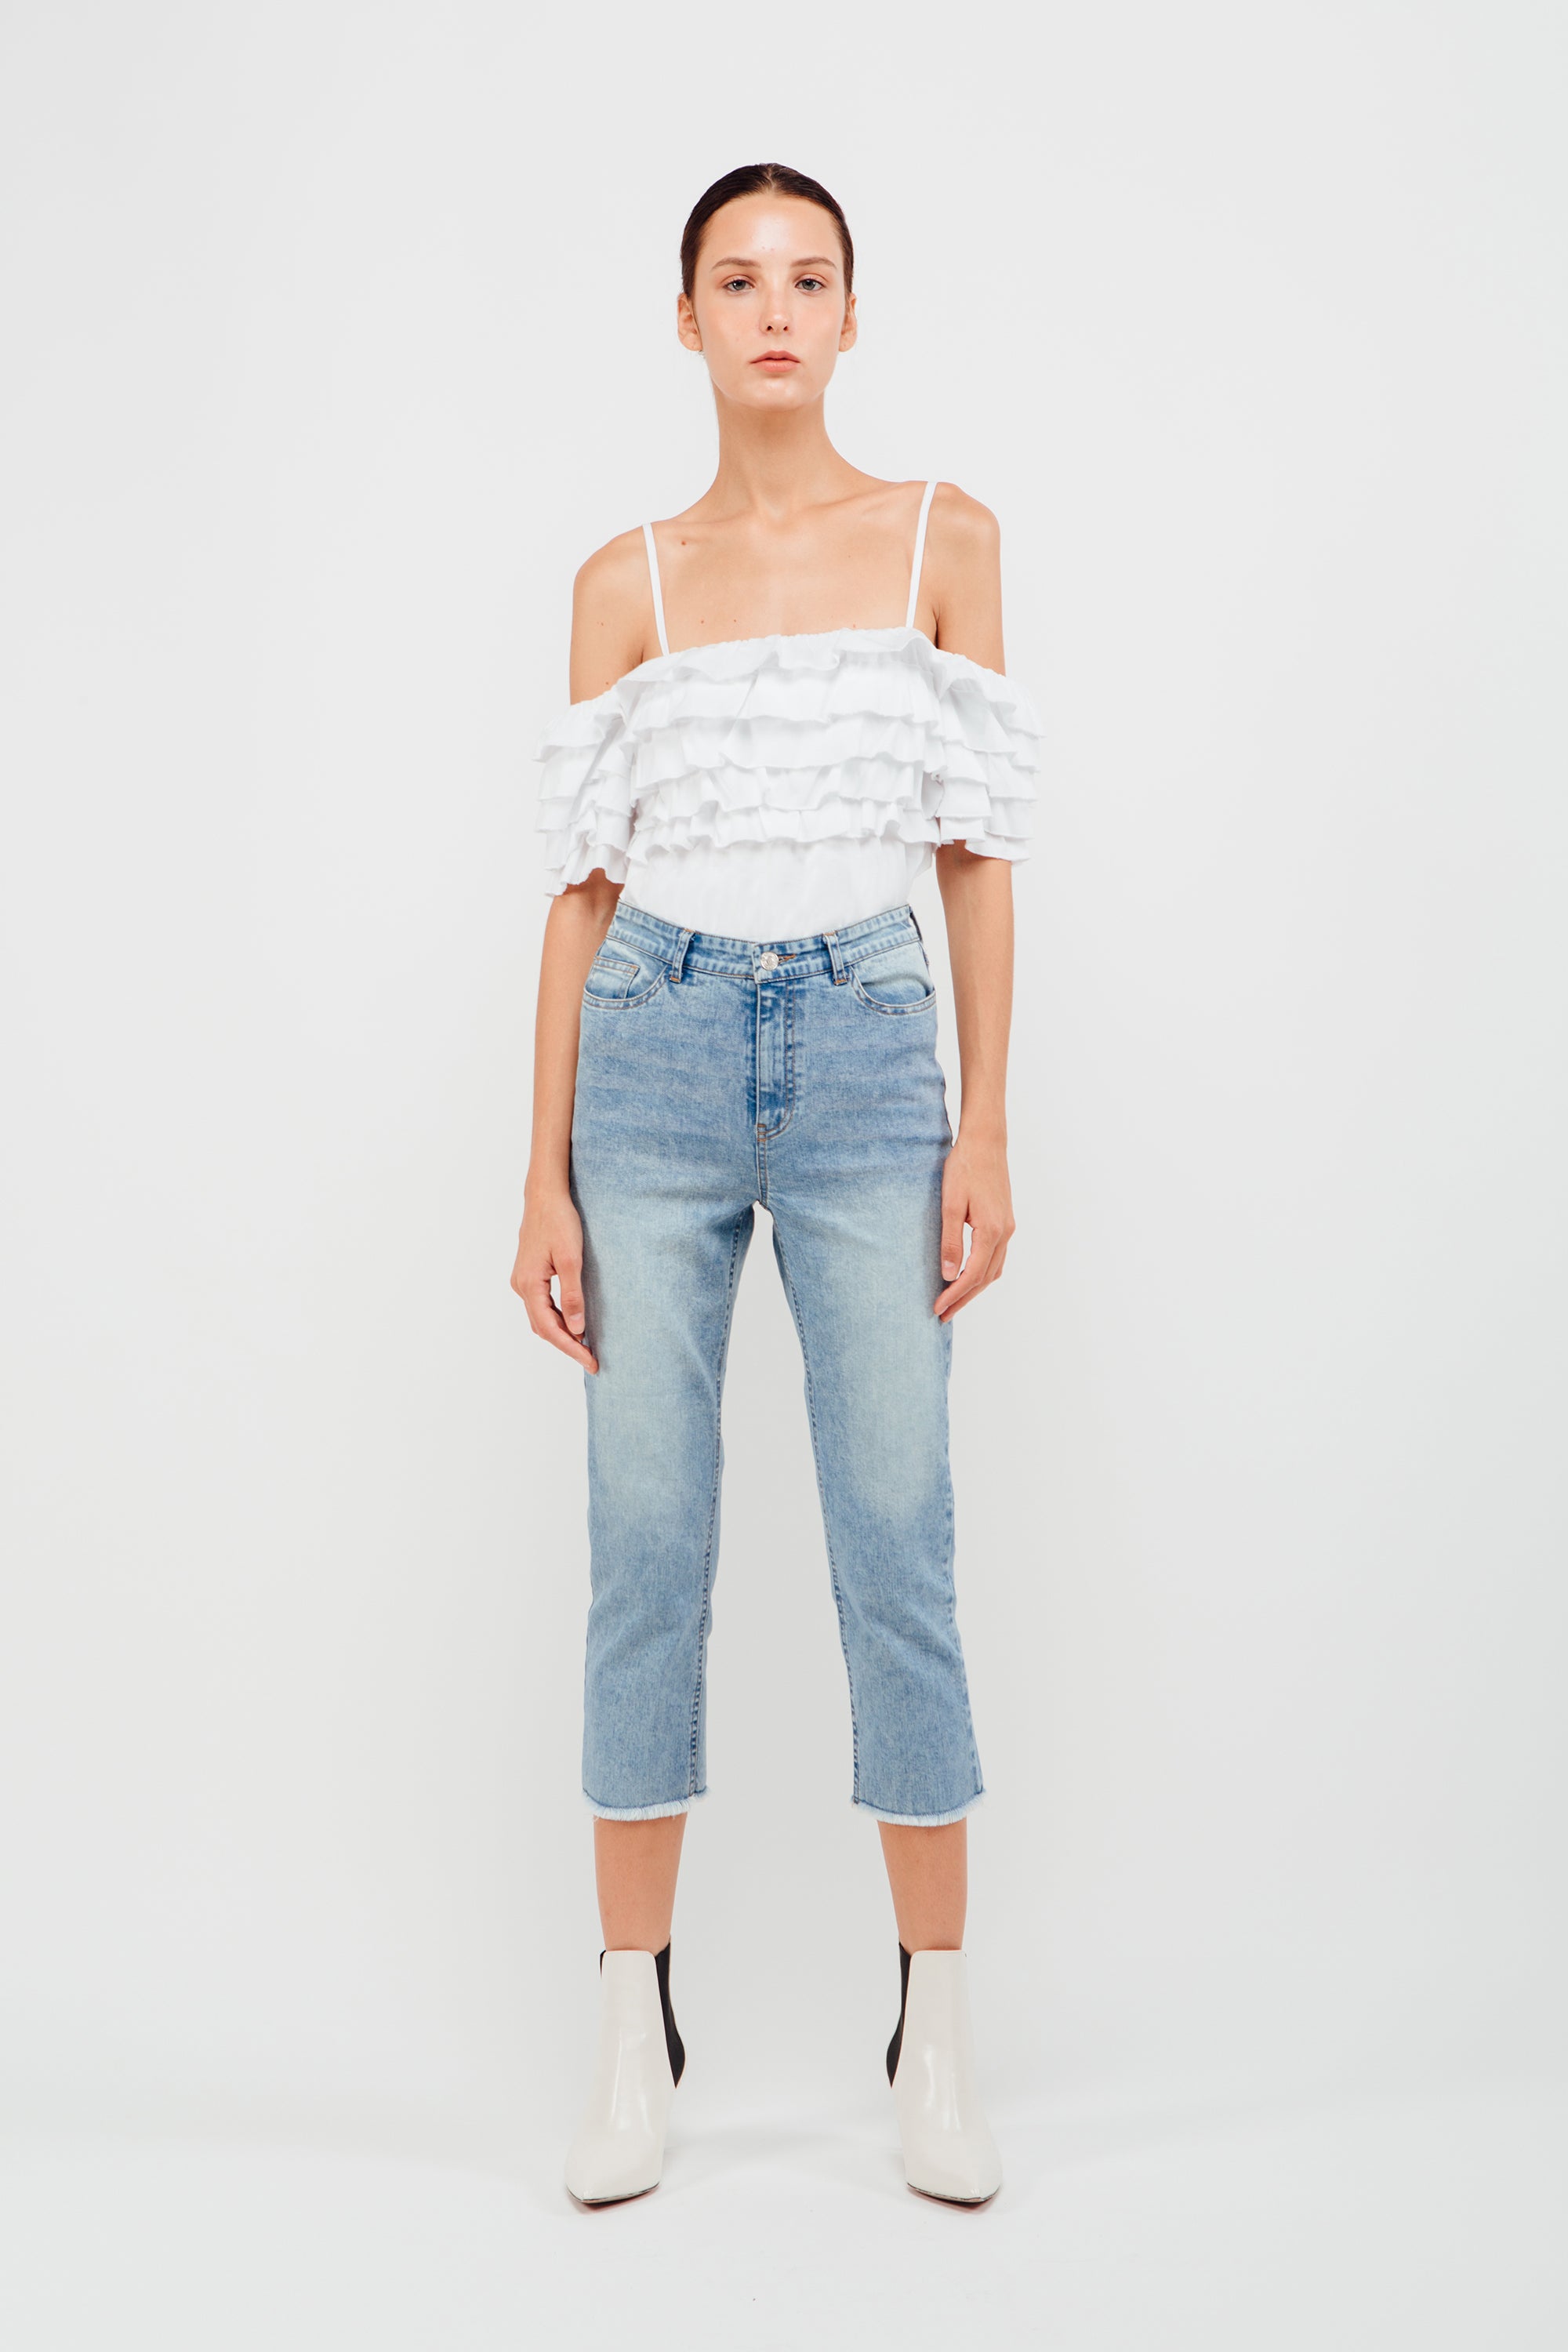 Layered Ruffled Off Shoulder Top In White